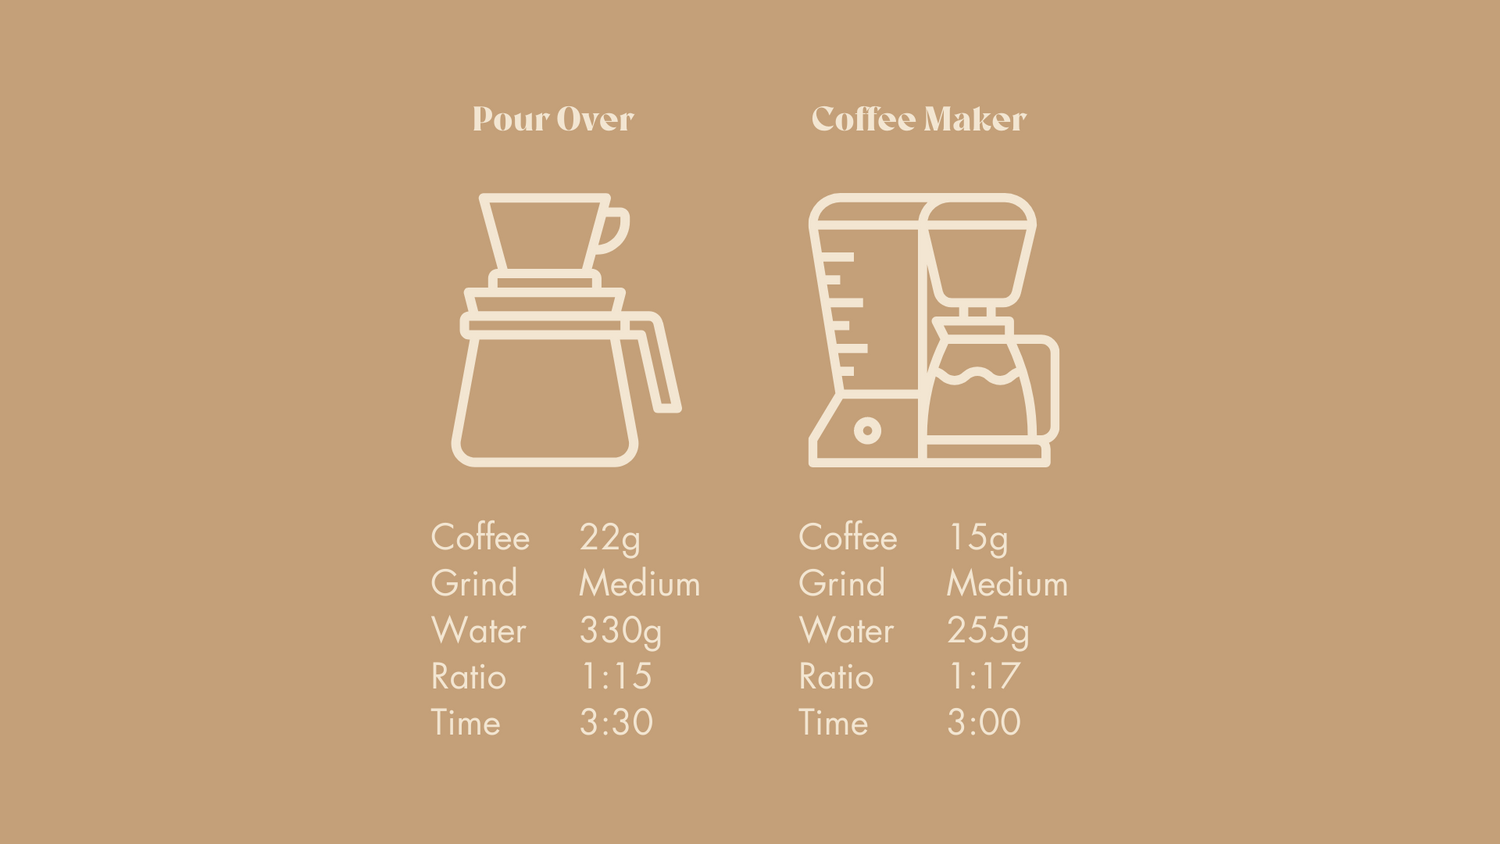 Instructions on how to use coffee beans to make coffee with a pour over and coffee maker